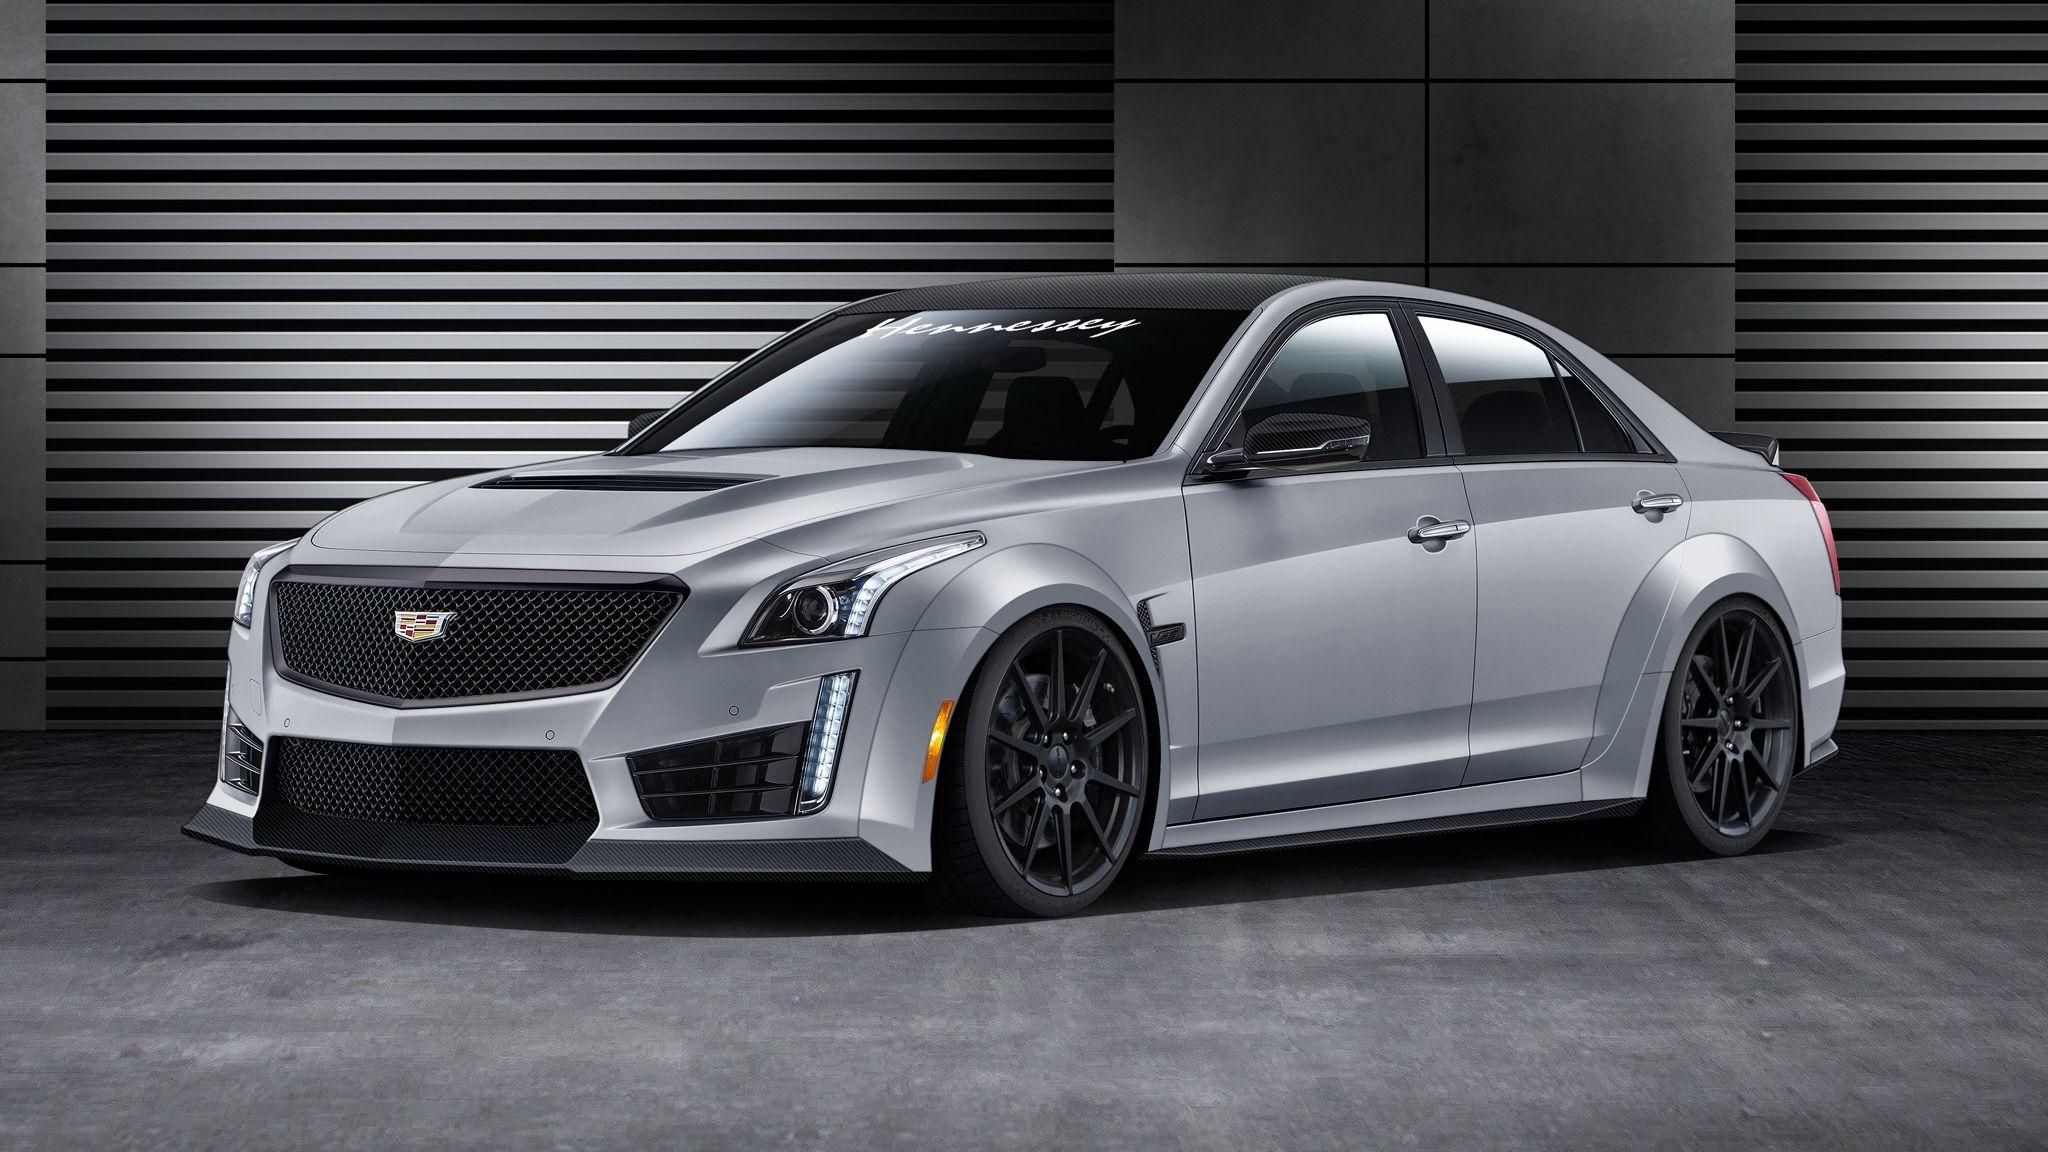 Cadillac Cts Wallpapers Top Free Cadillac Cts Backgrounds Wallpaperaccess